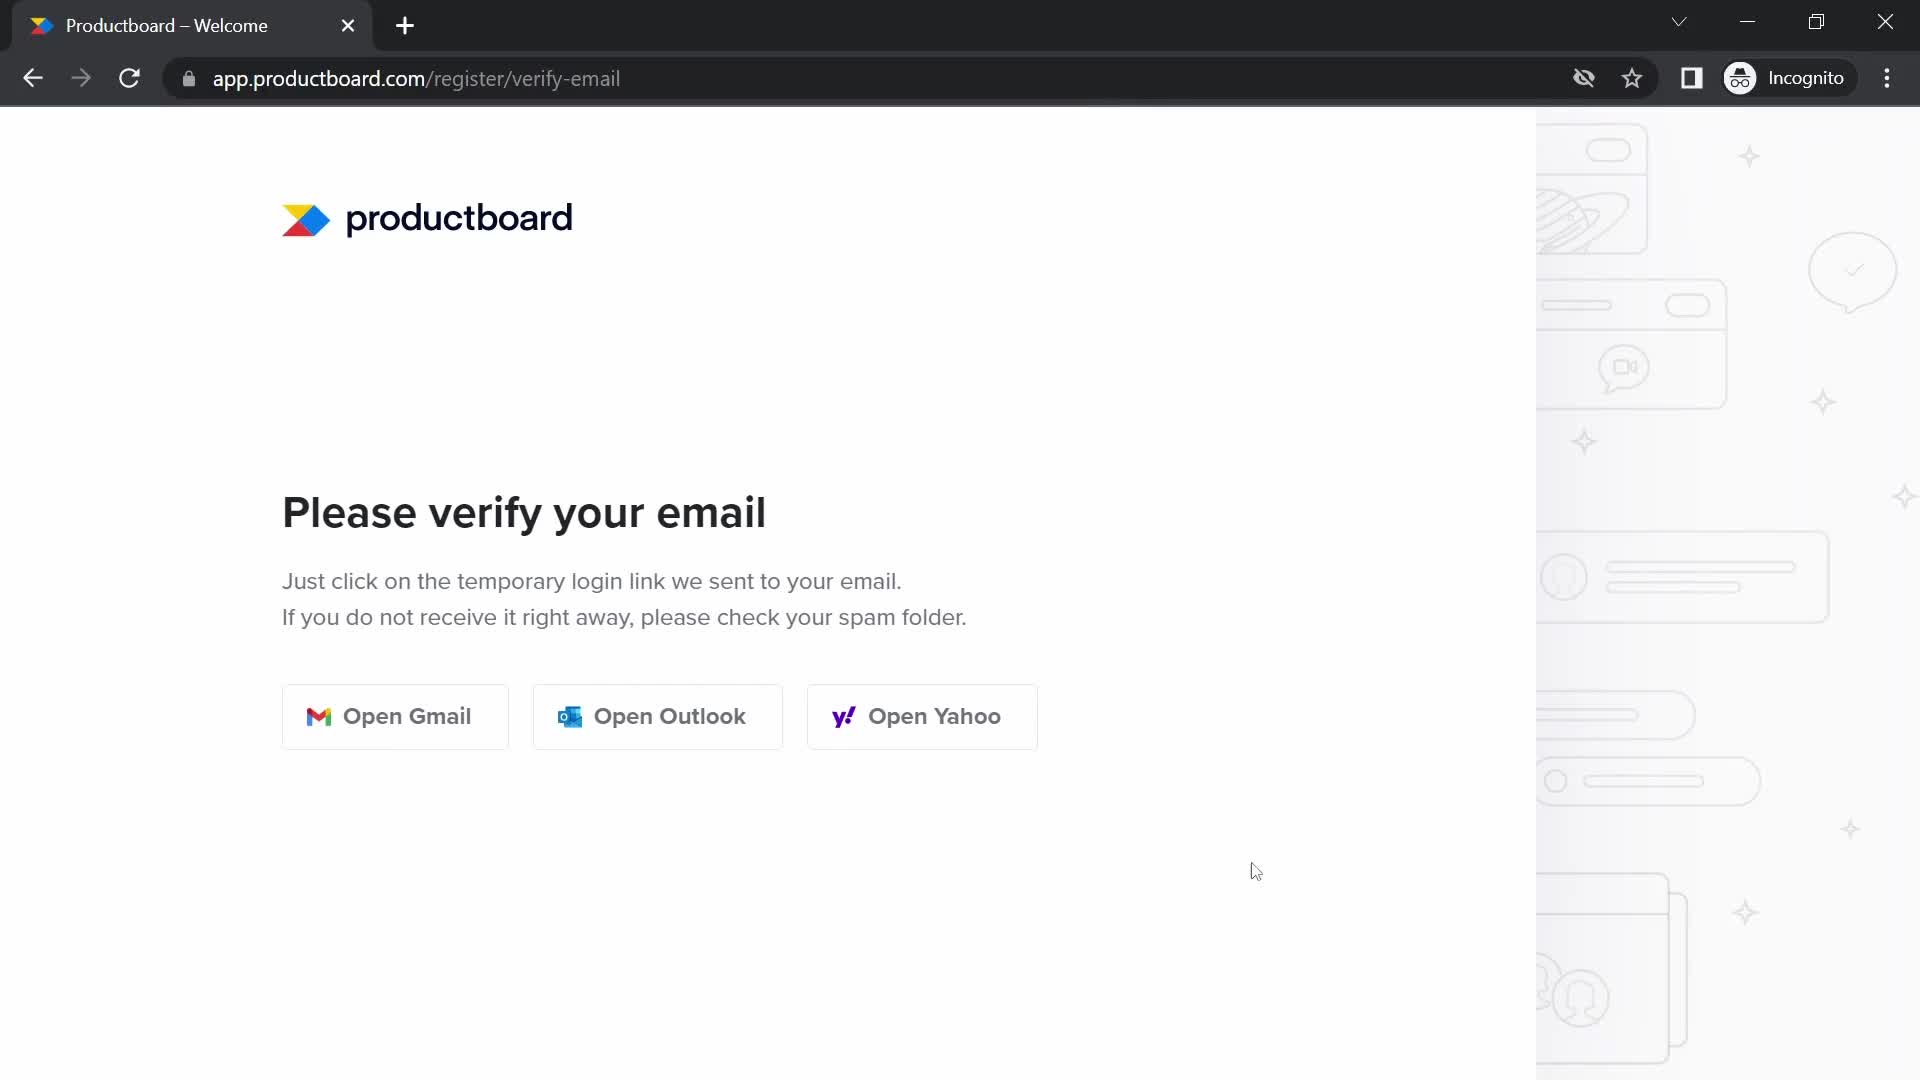 Screenshot of Check your inbox on Onboarding on Productboard user flow